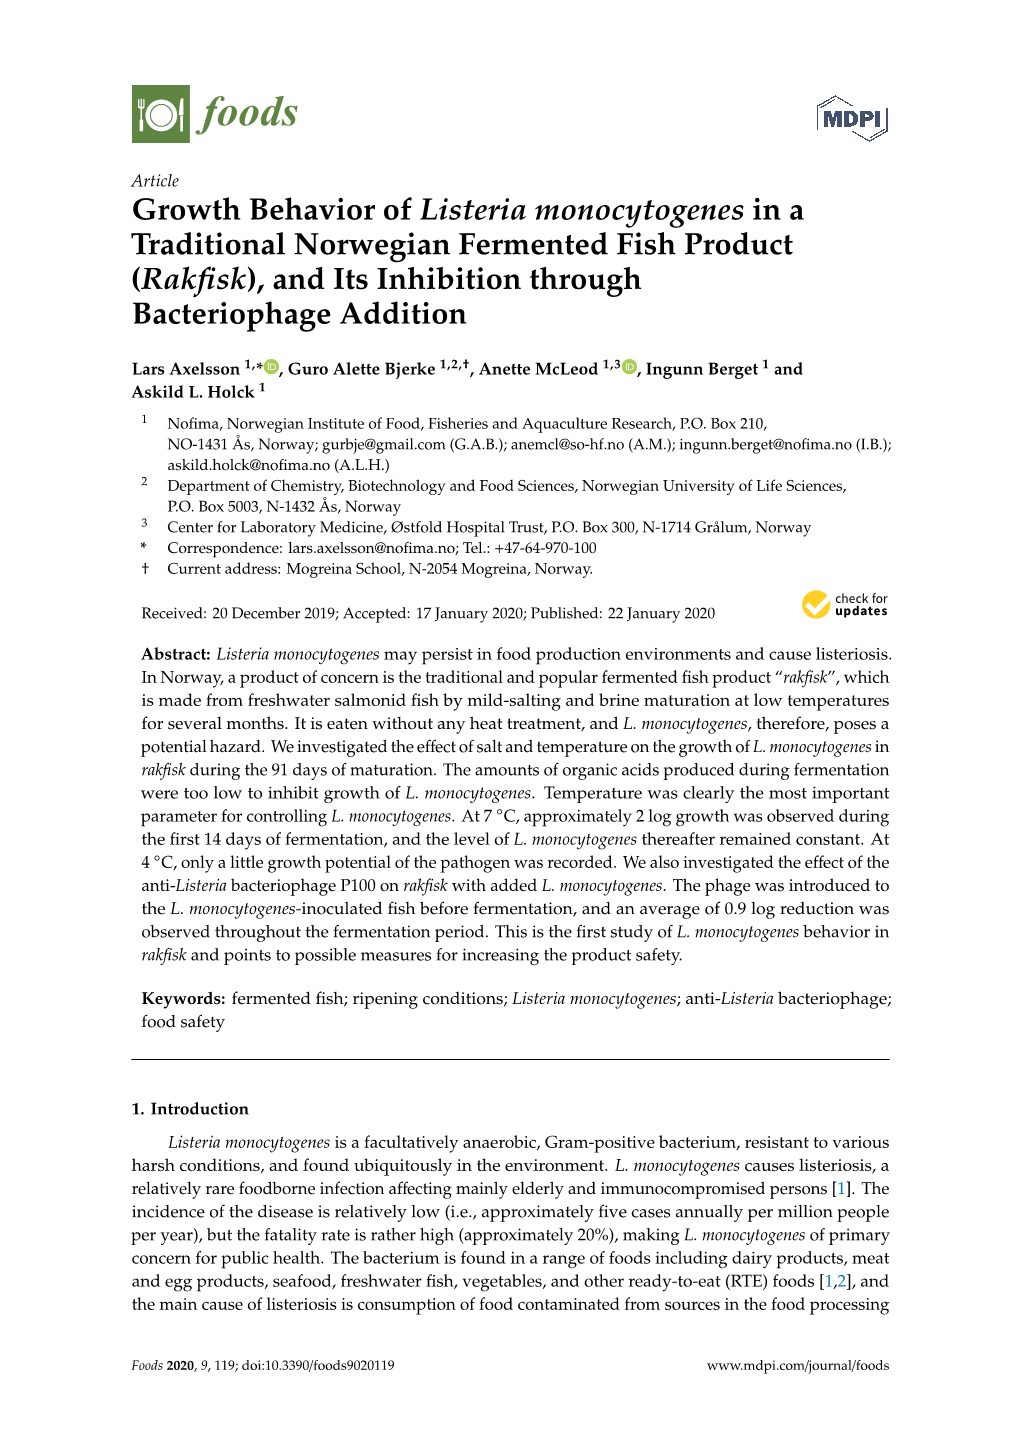 Growth Behavior of Listeria Monocytogenes in a Traditional Norwegian Fermented Fish Product (Rakﬁsk), and Its Inhibition Through Bacteriophage Addition